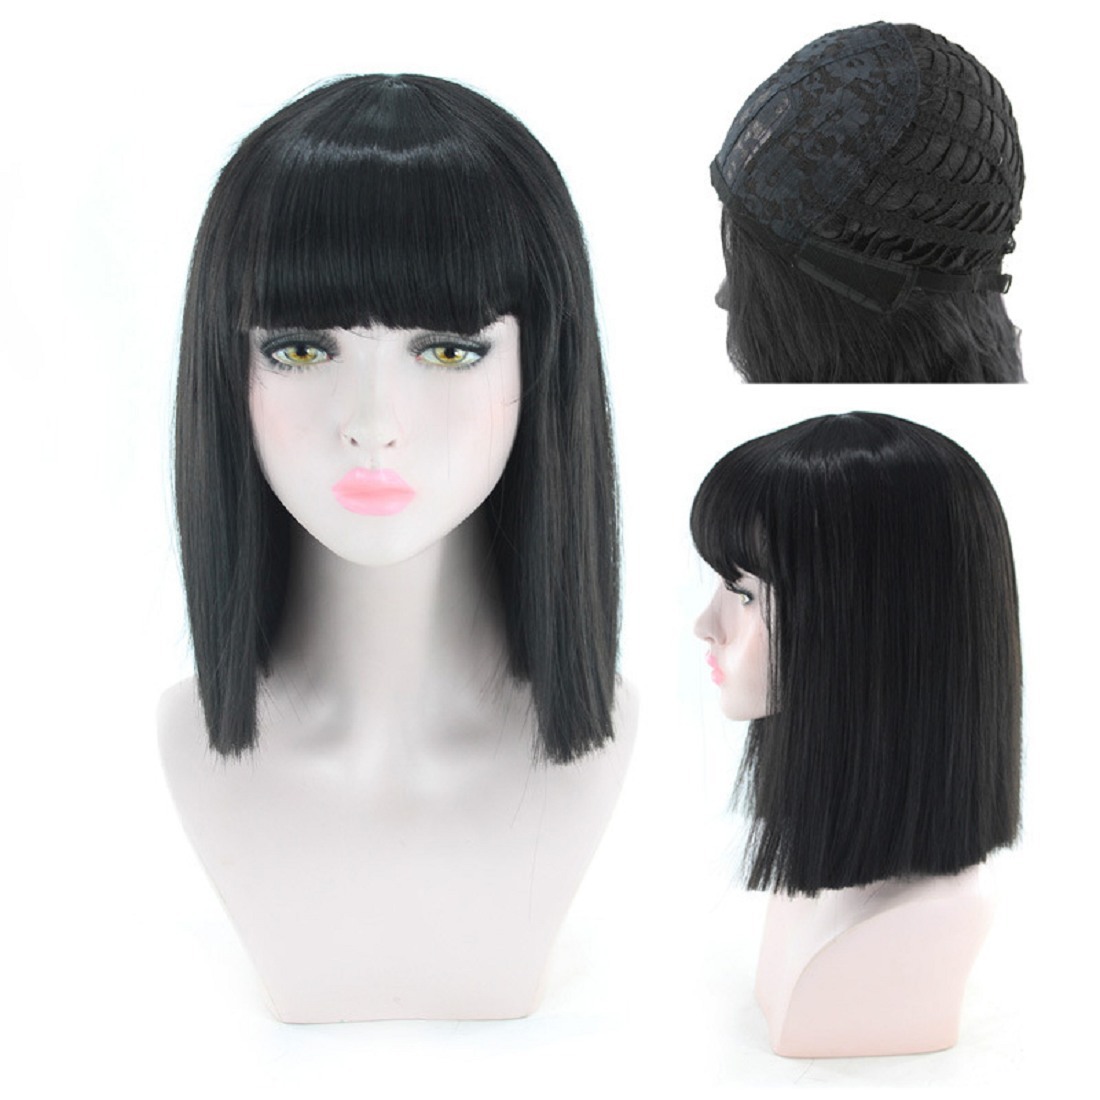 Short Bob with Bangs for Women Heat Resistant Synthetic Hair Wigs 12inches - $17.00